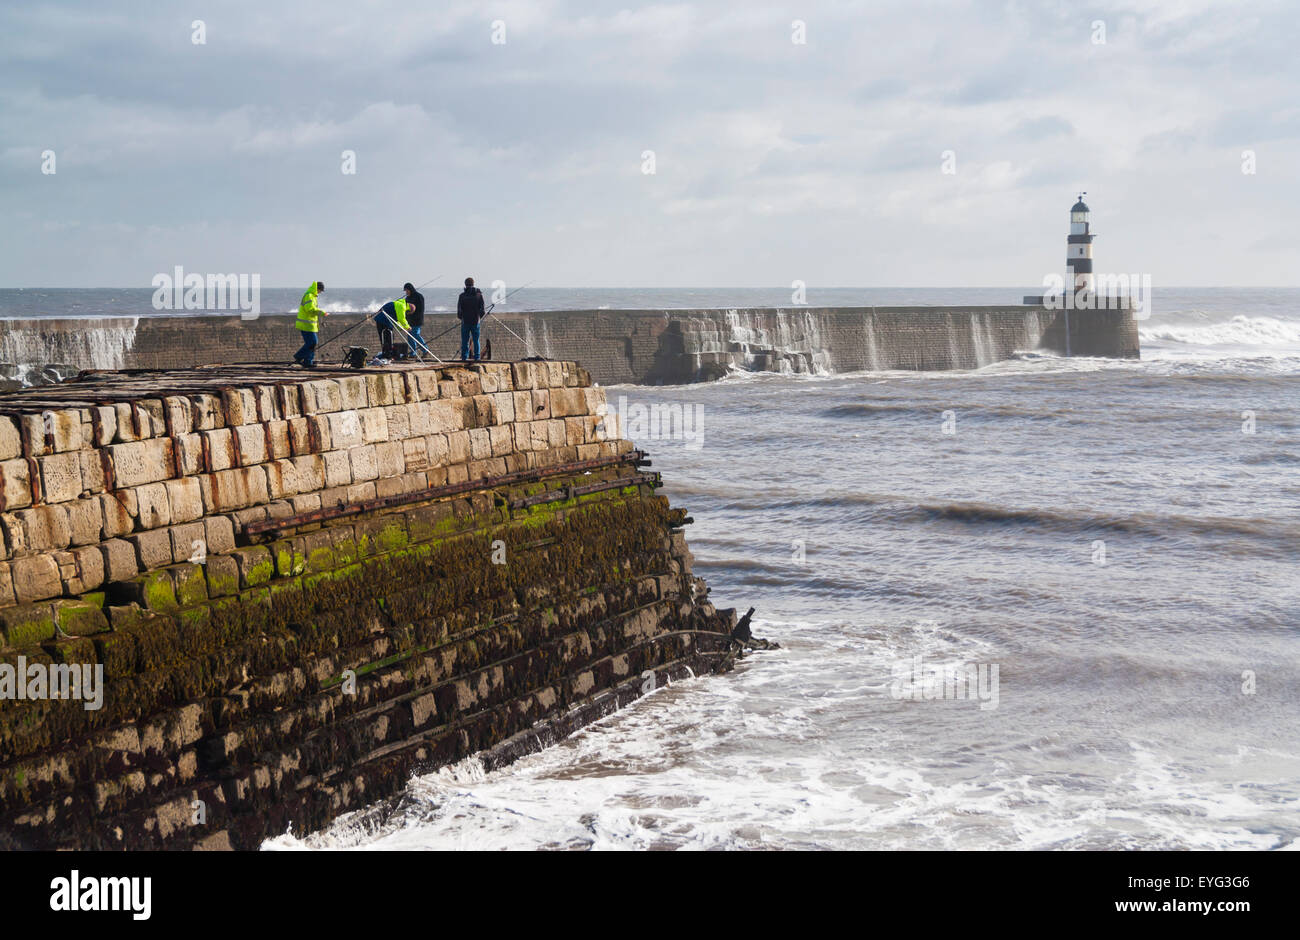 People fishing from Seaham pier on a stormy day. Seaham, County Durham, England, UK Stock Photo